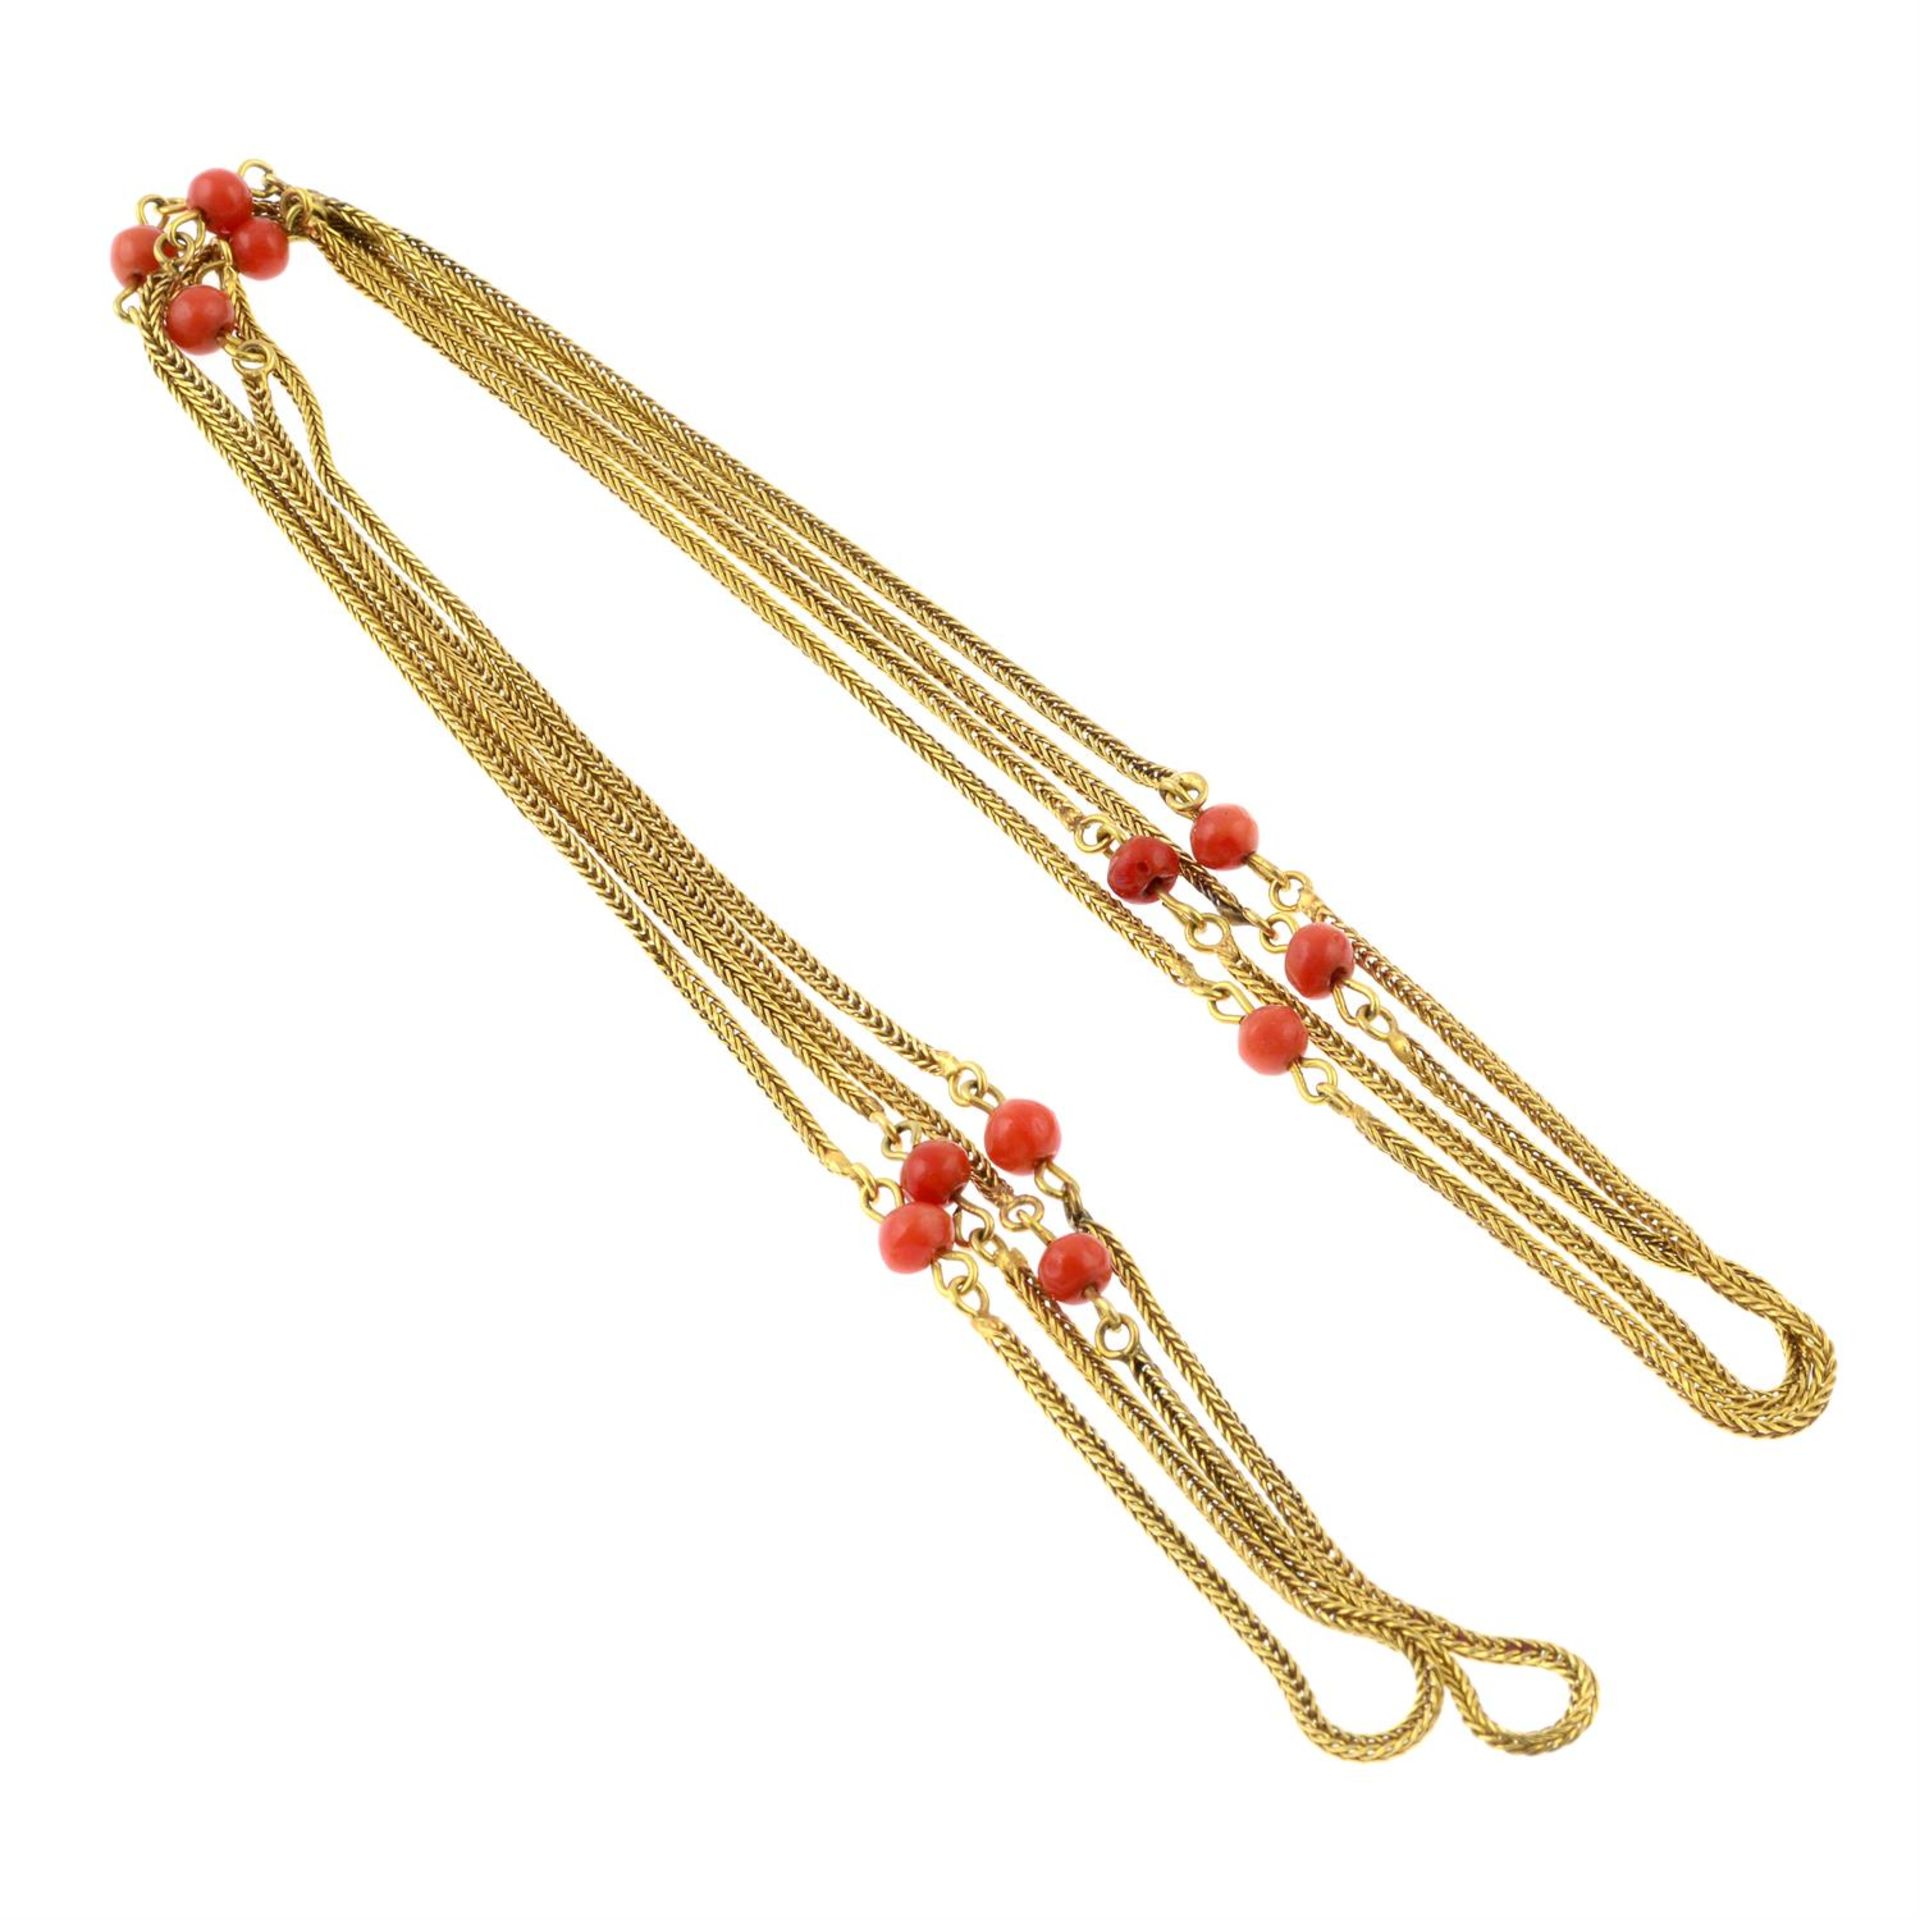 An early 20th century gold herringbone-link necklace, with coral highlights. - Image 2 of 2